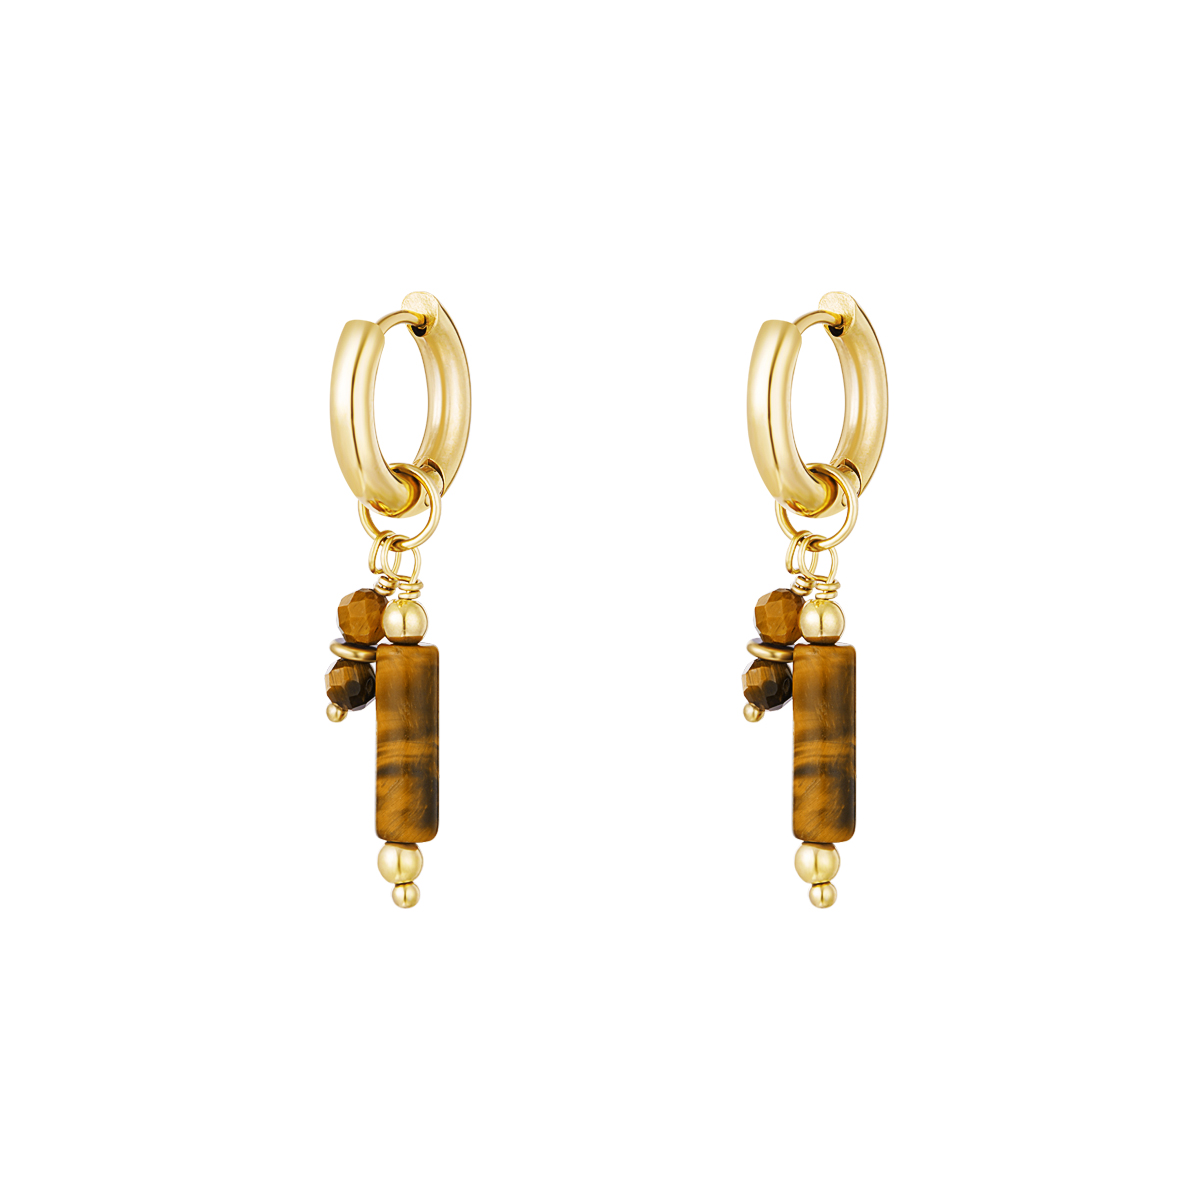 Earrings with stone charms